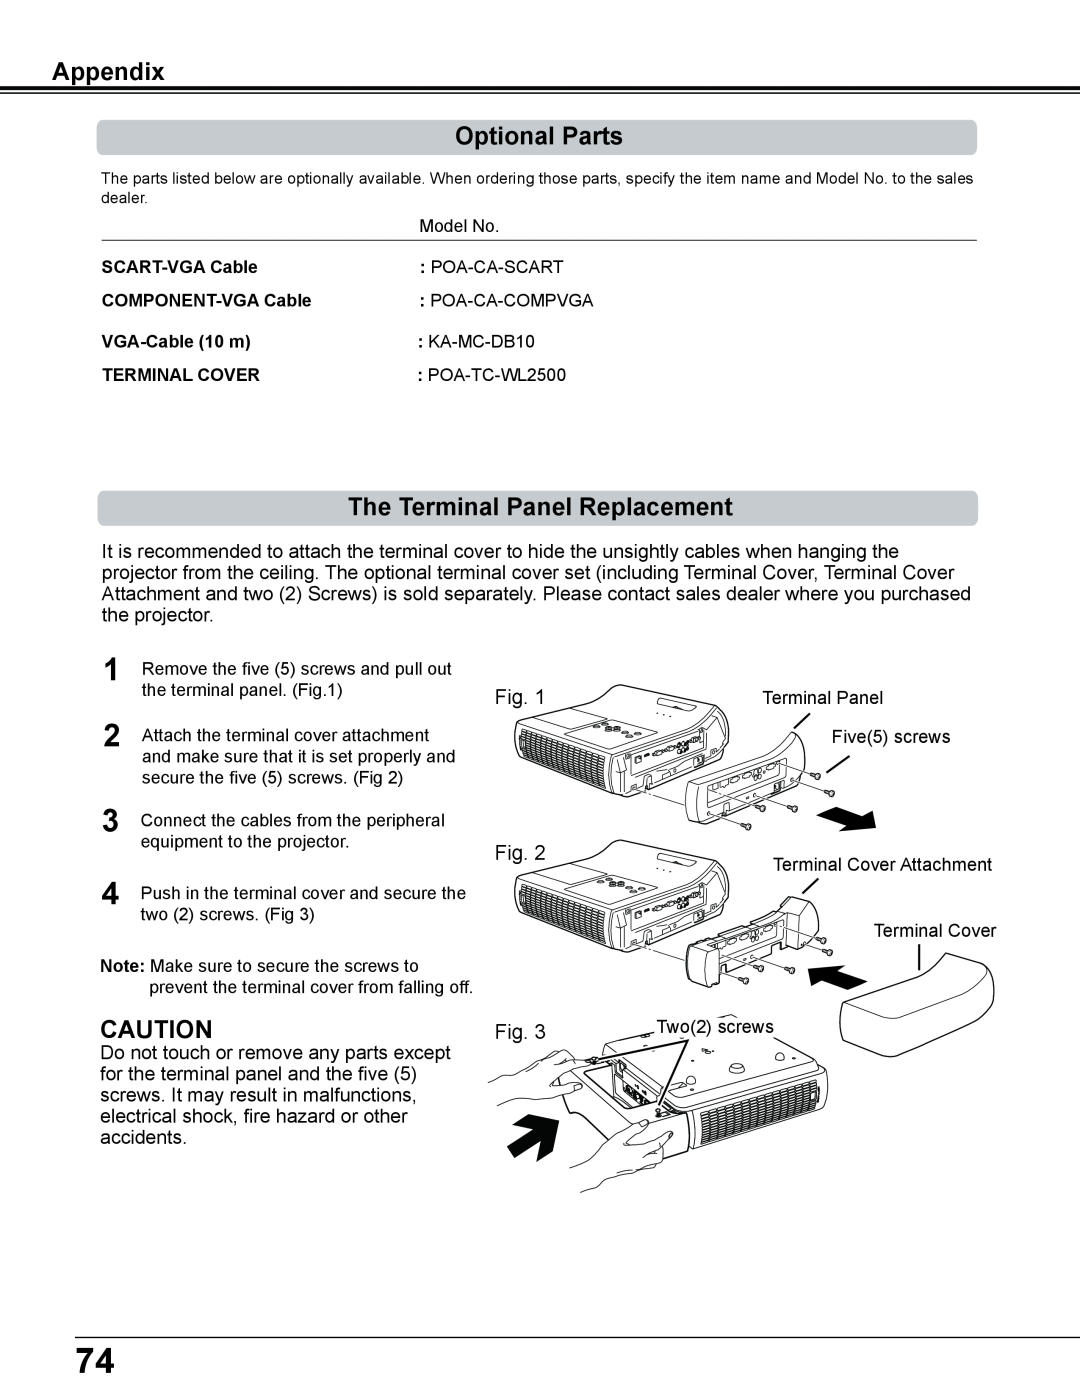 Sanyo PLC-WL2503A owner manual Appendix Optional Parts, The Terminal Panel Replacement, Two2 screws 